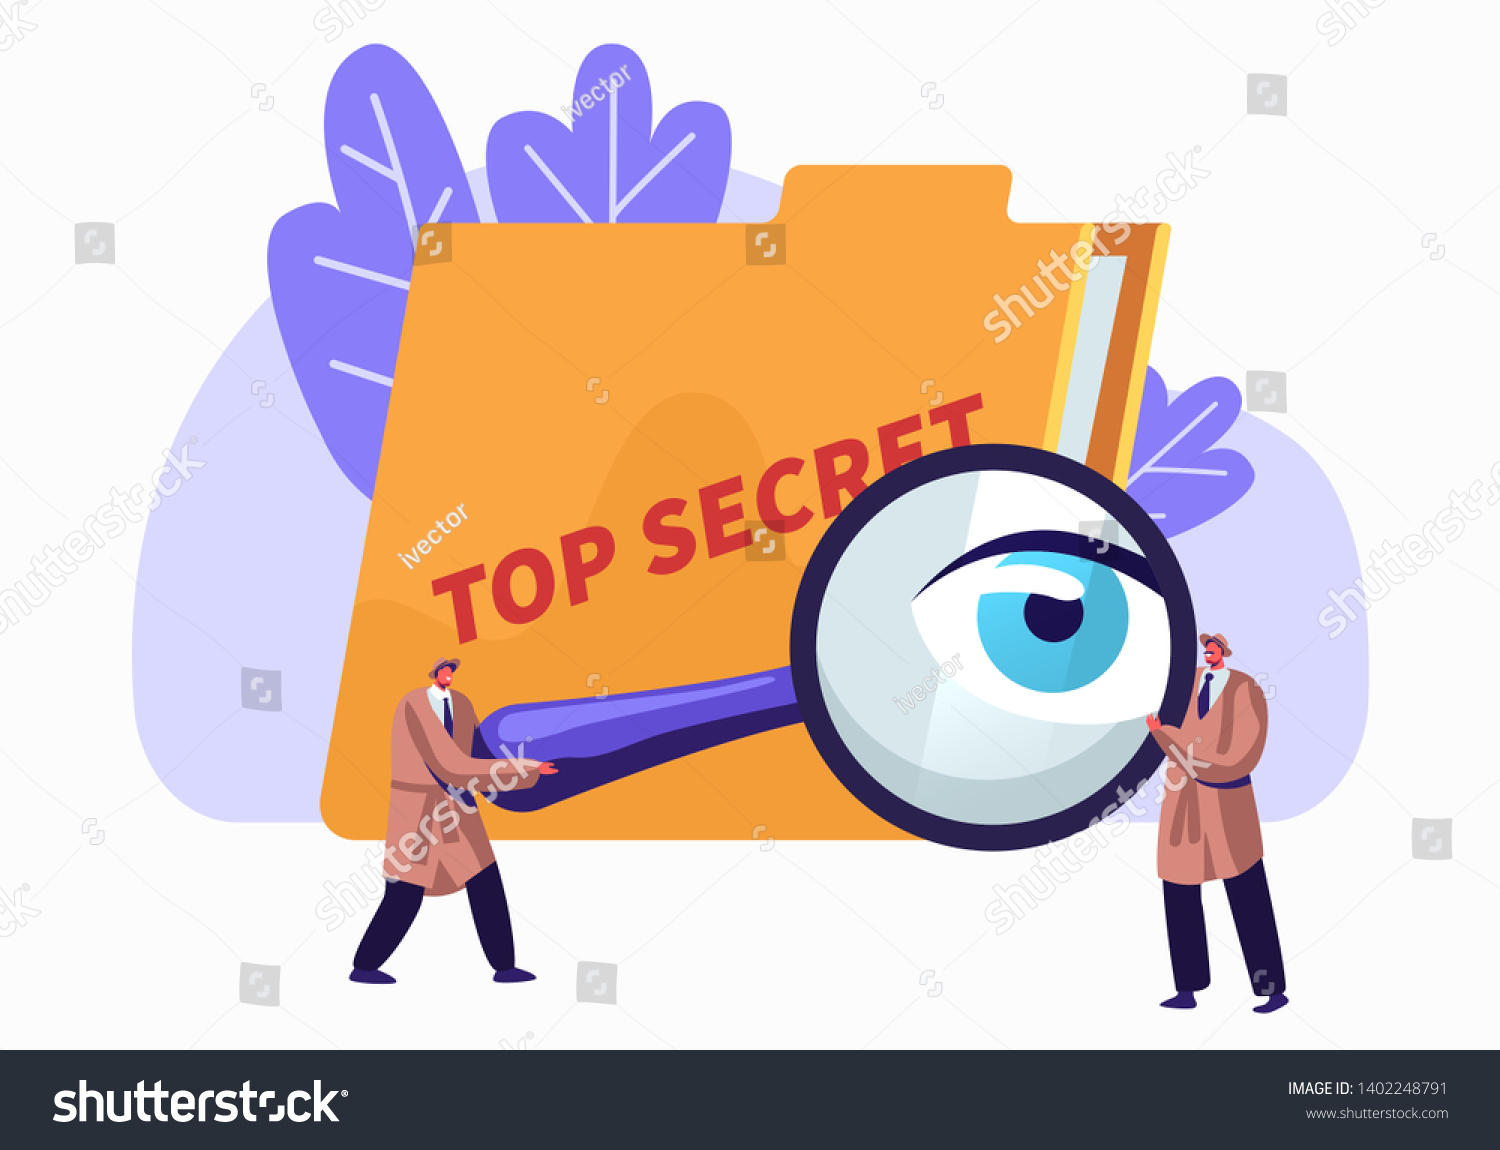 SVG of Police, Intelligence Service, Spies, Watchers Searching for Top Secret Files with Magnifier Glass. Police Private Detectives at Work Investigating and Solving Crimes. Cartoon Flat Vector Illustration svg